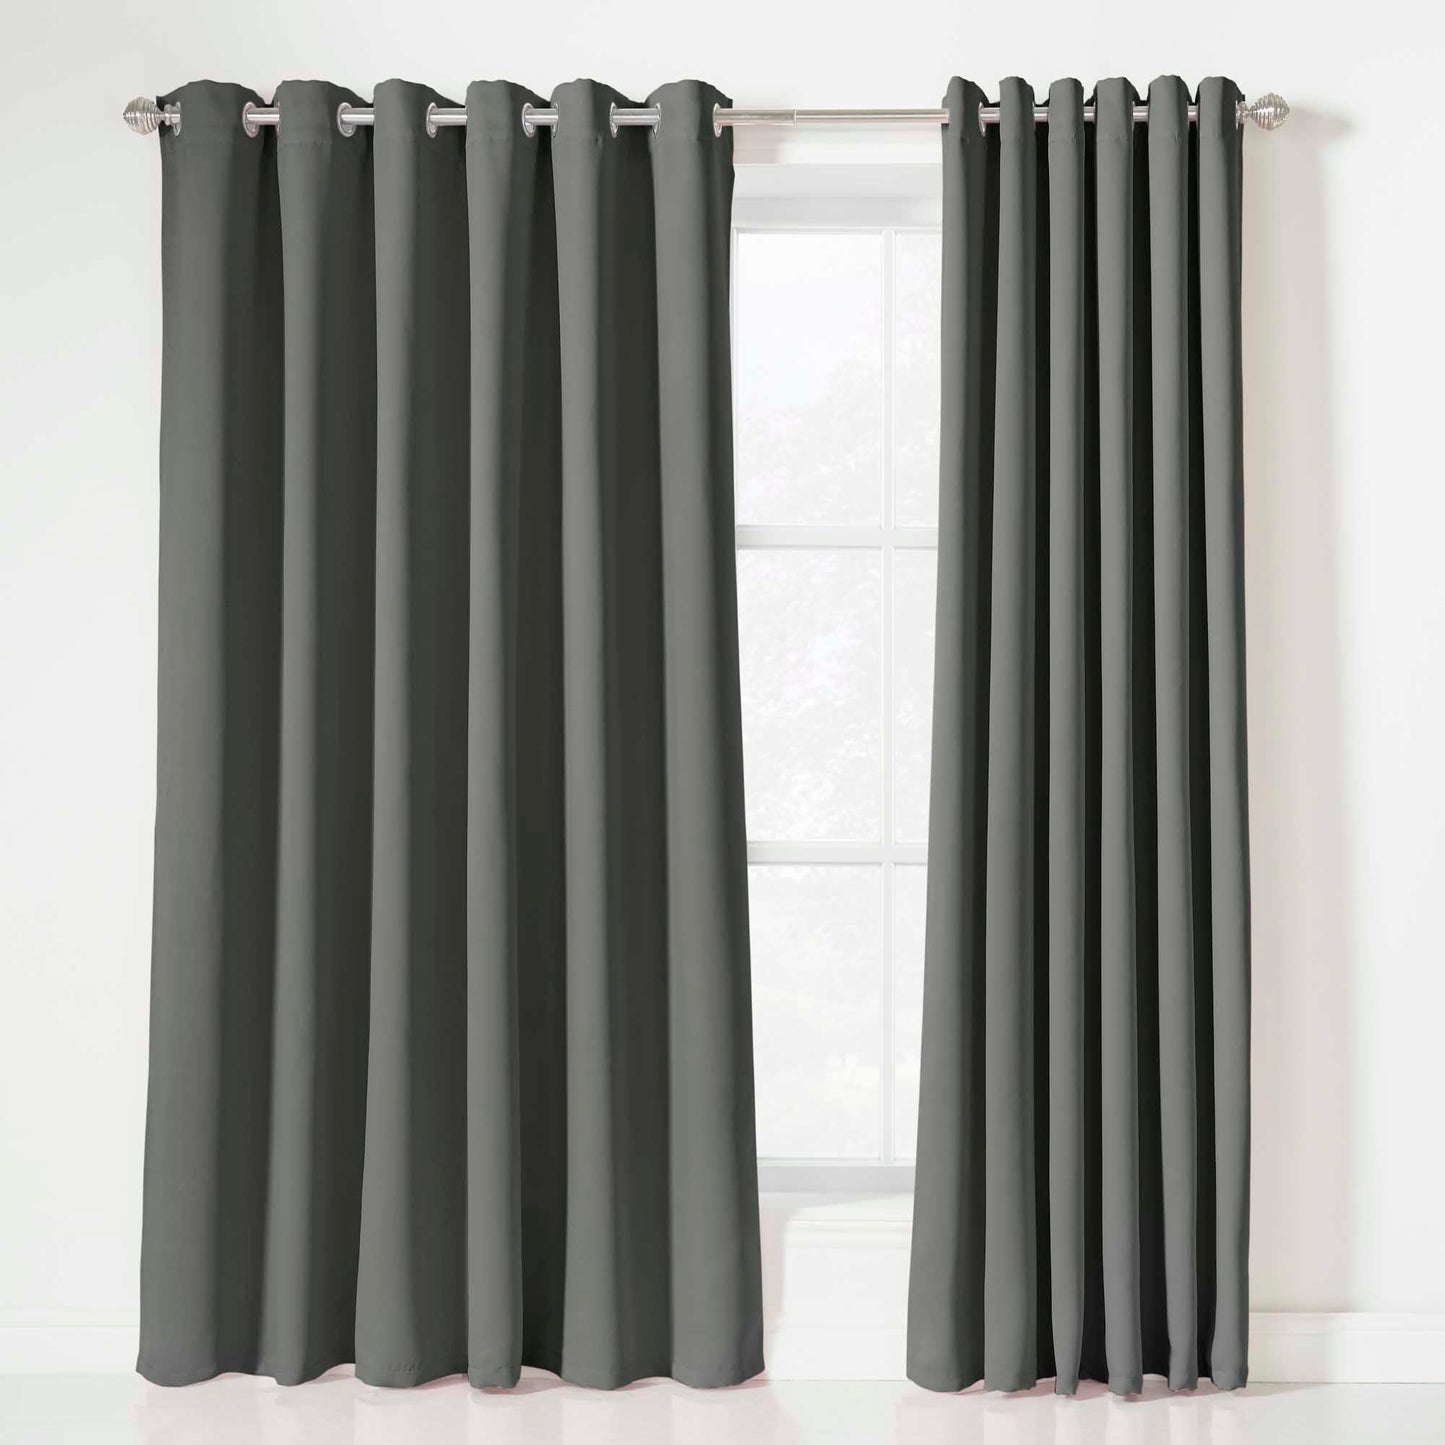 Eclipse Soft Touch Blockout Eyelet Curtains - Grey